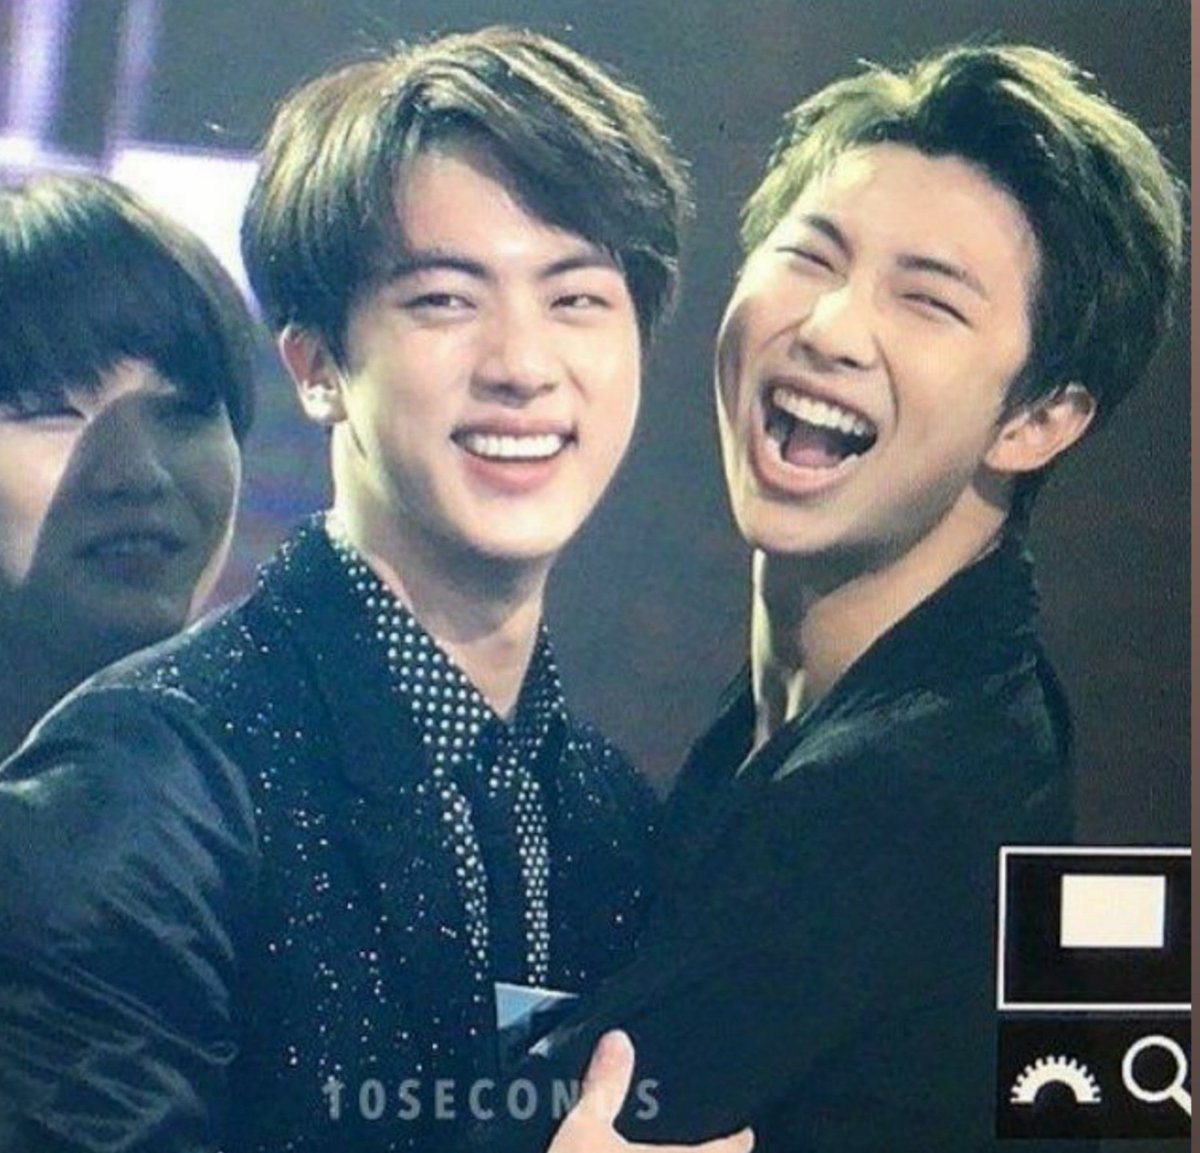 Always laugh with your seokjin